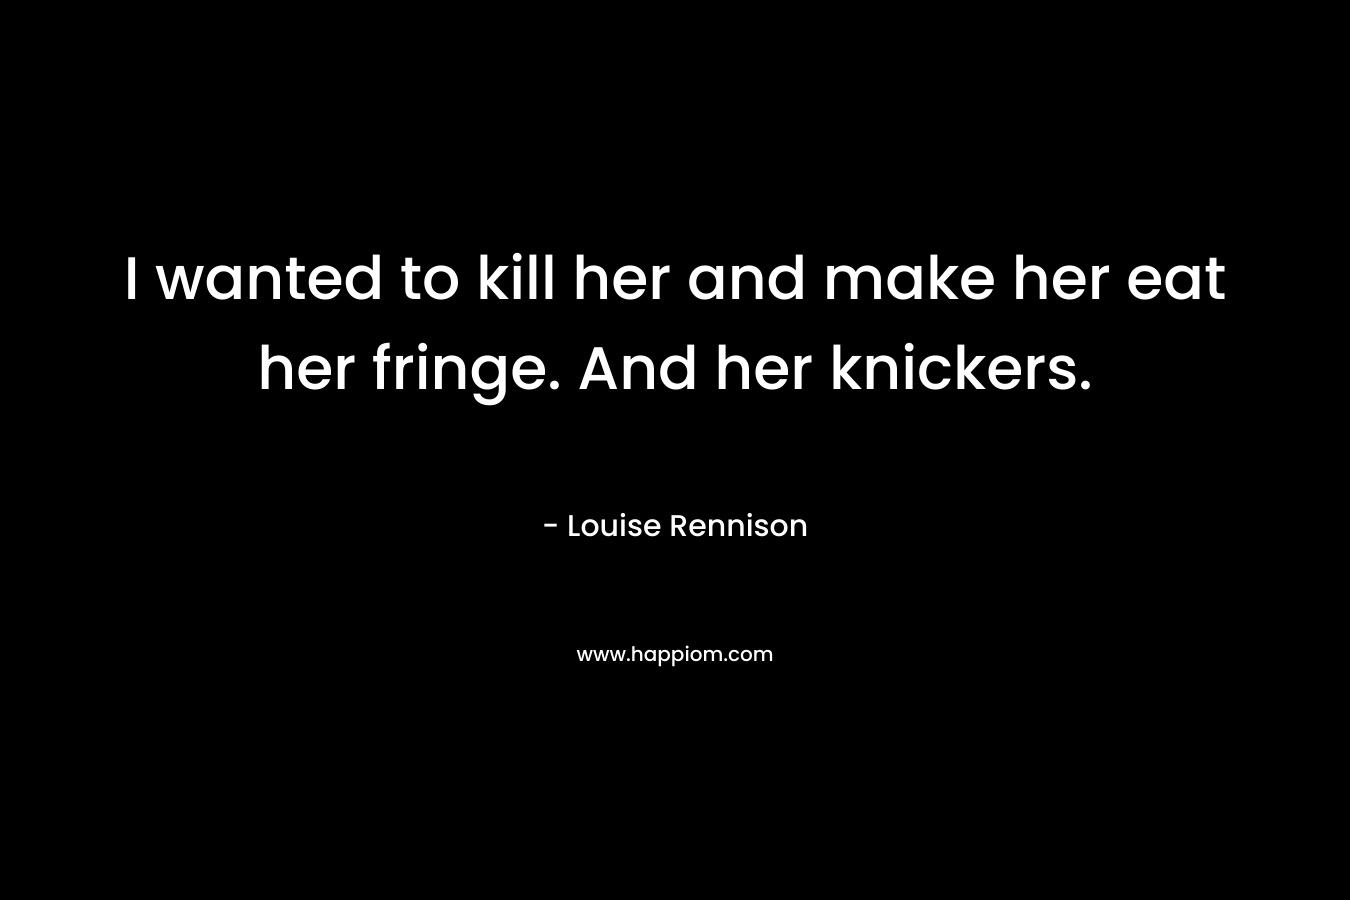 I wanted to kill her and make her eat her fringe. And her knickers. – Louise Rennison